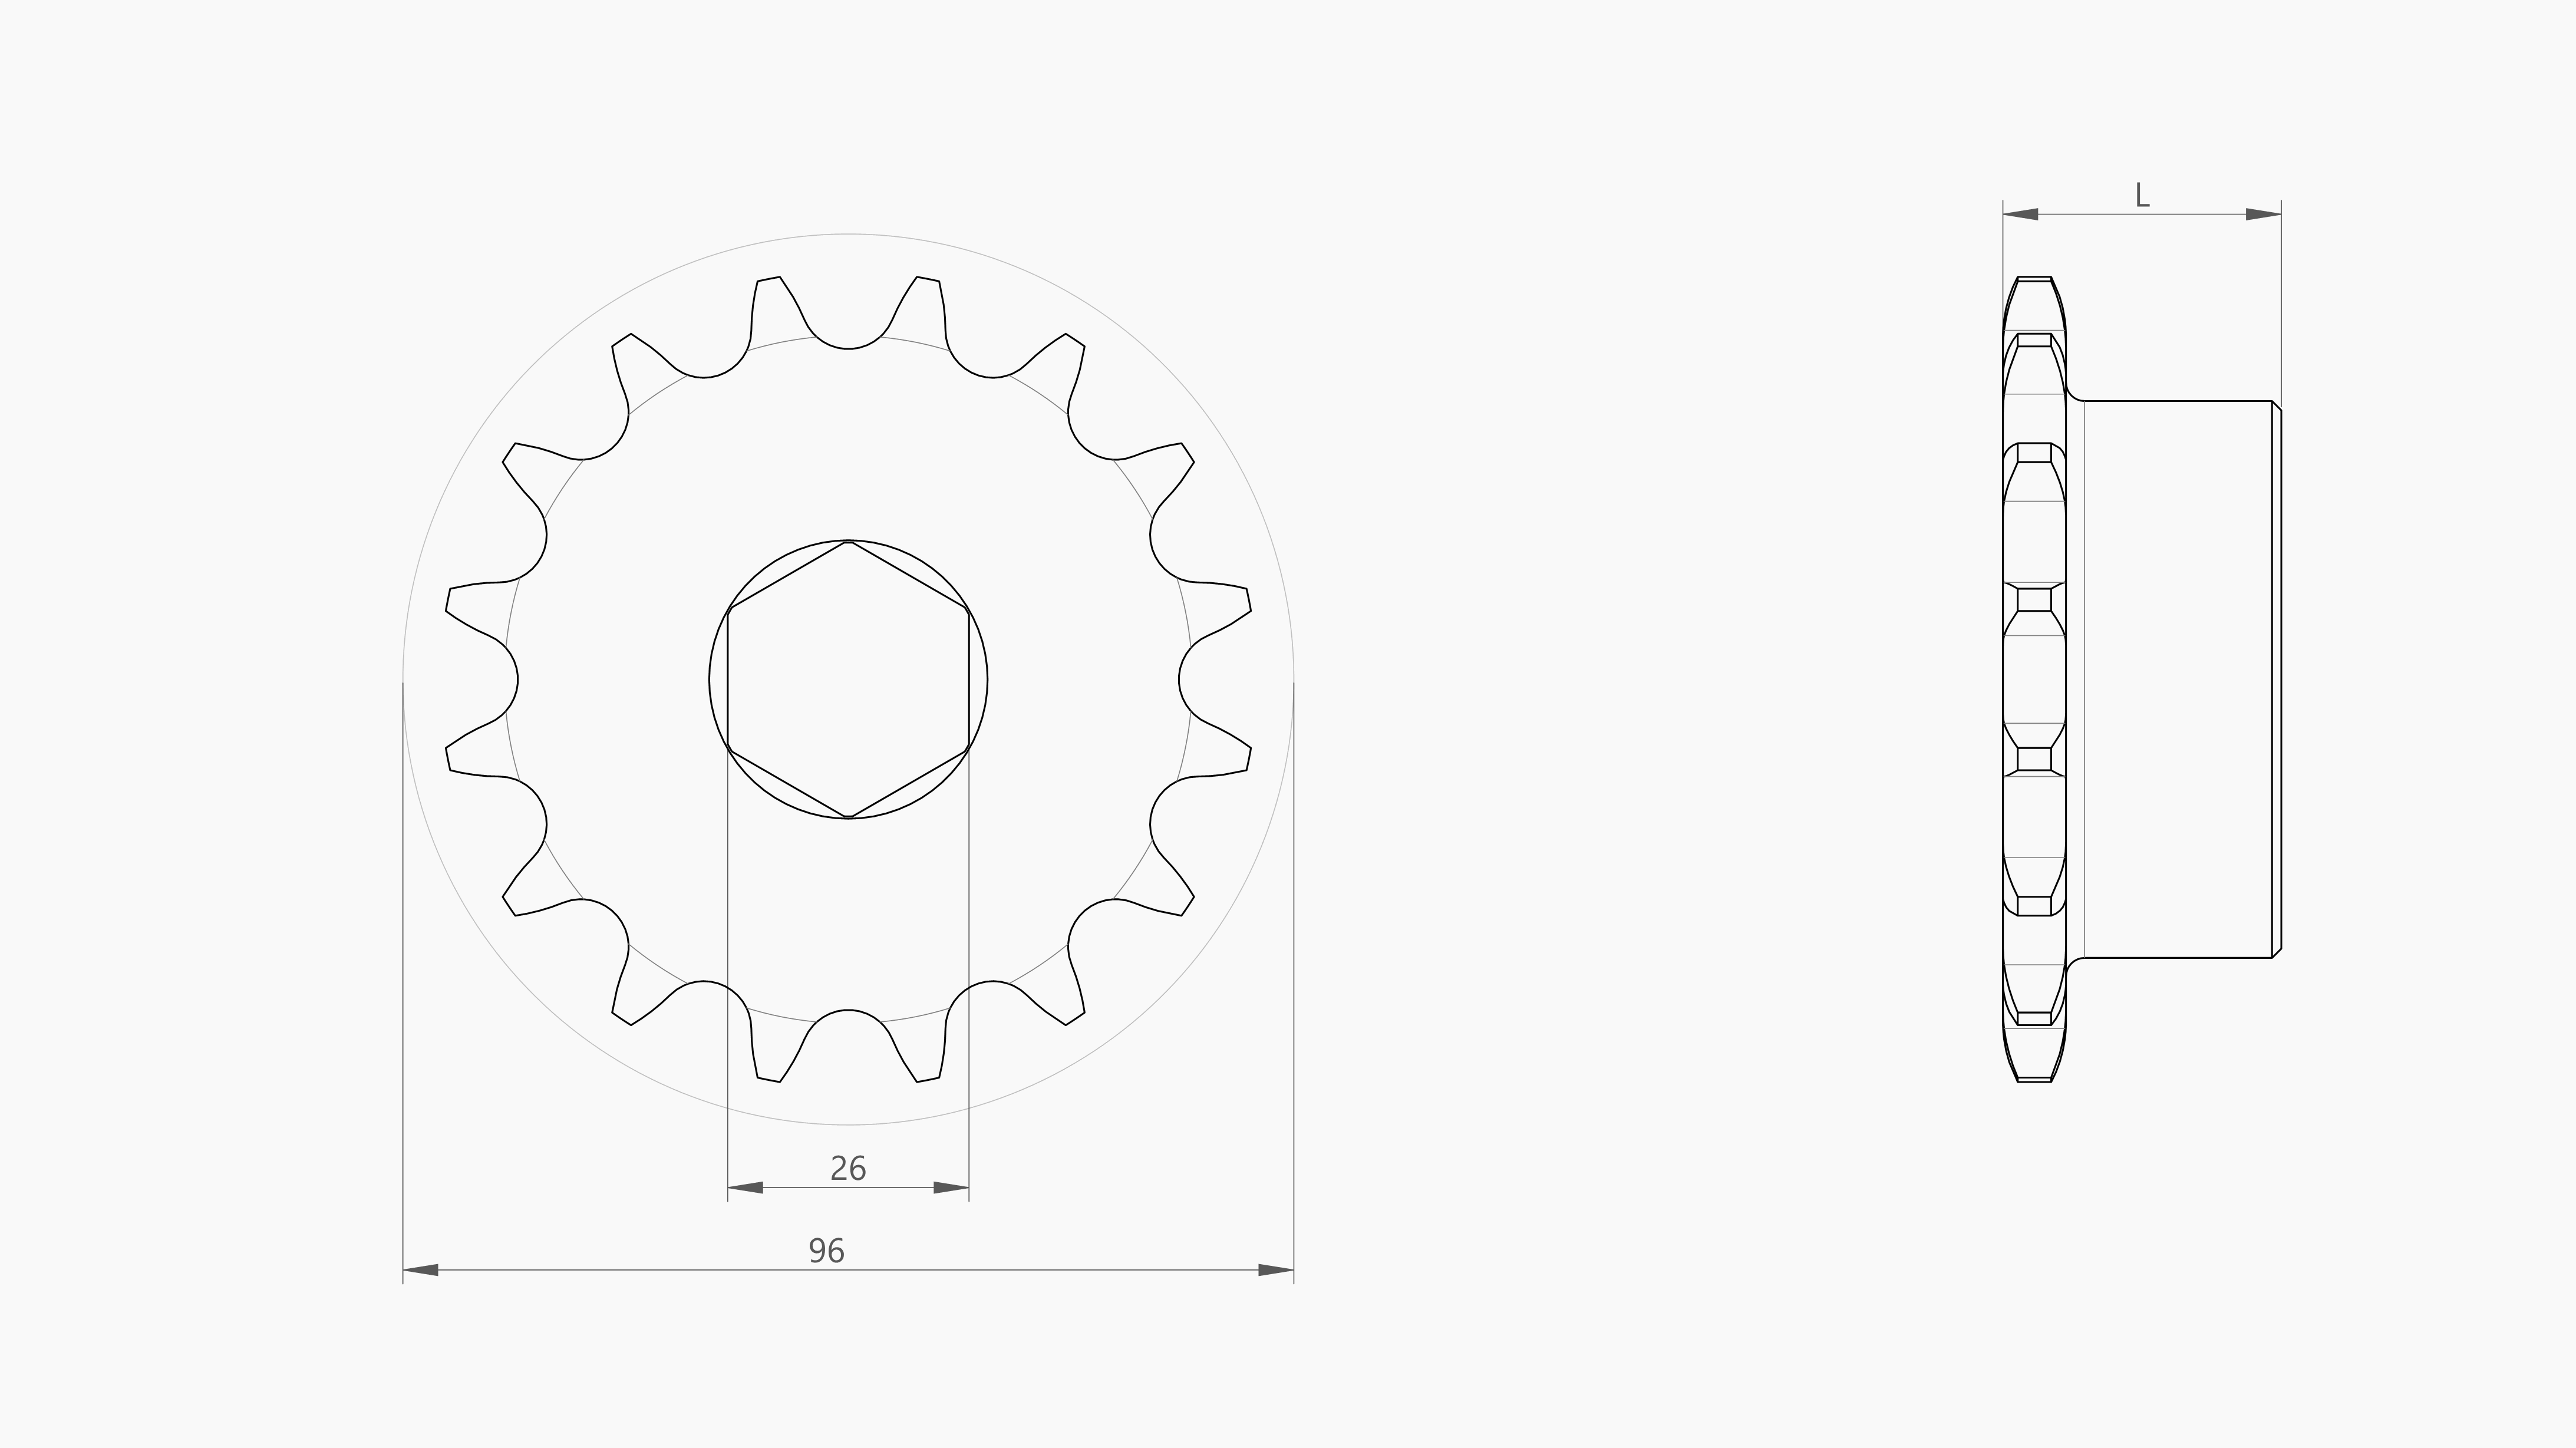 chain sprocket cad drawings